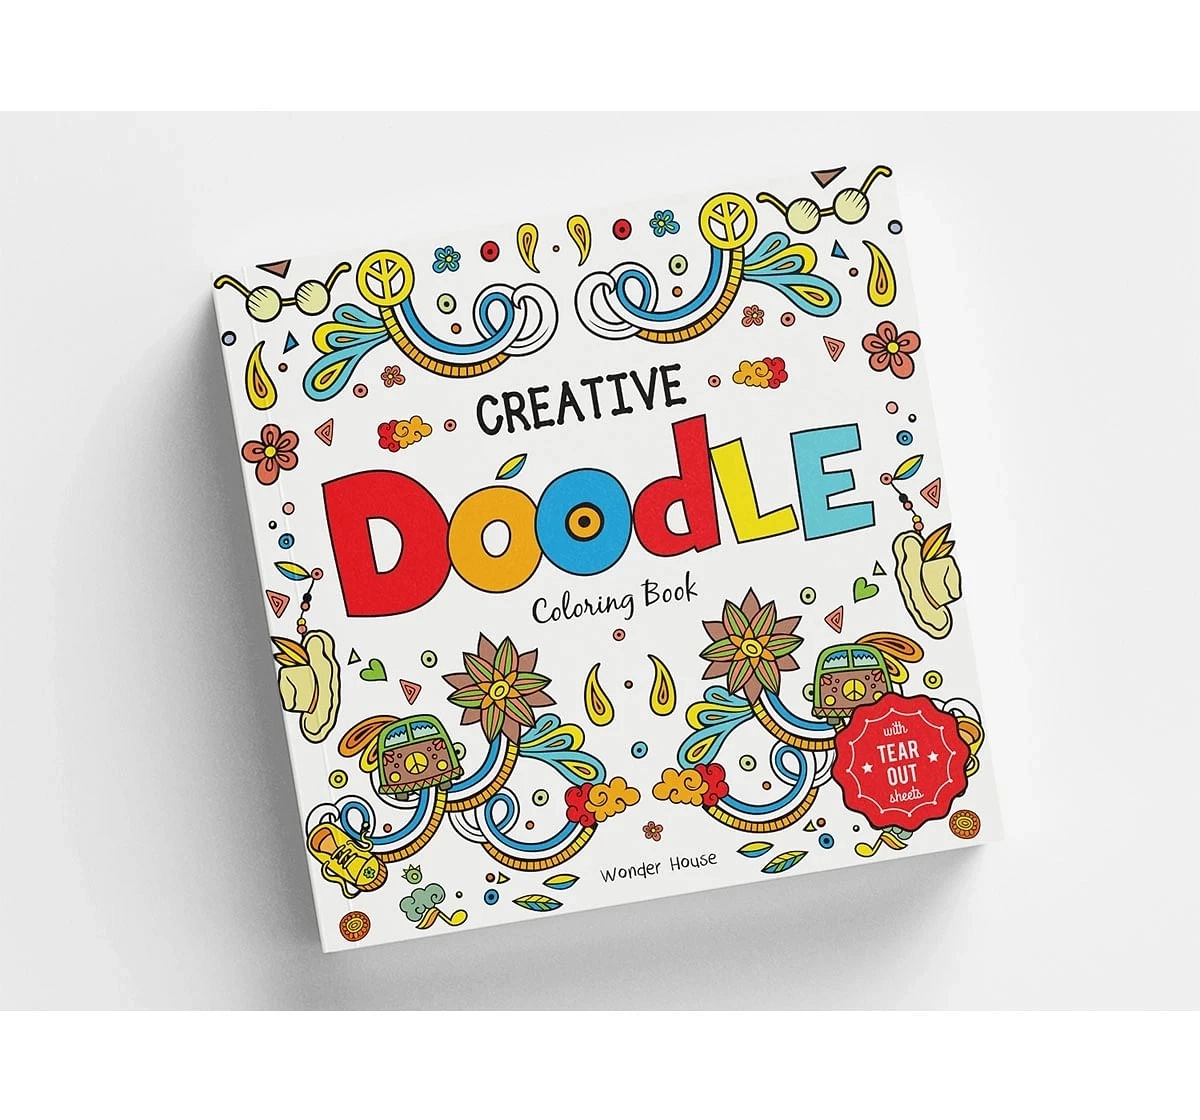 Wonder House Books Creative Doodle Coloring Book With Tear Out Sheets for kids 3Y+, Multicolour